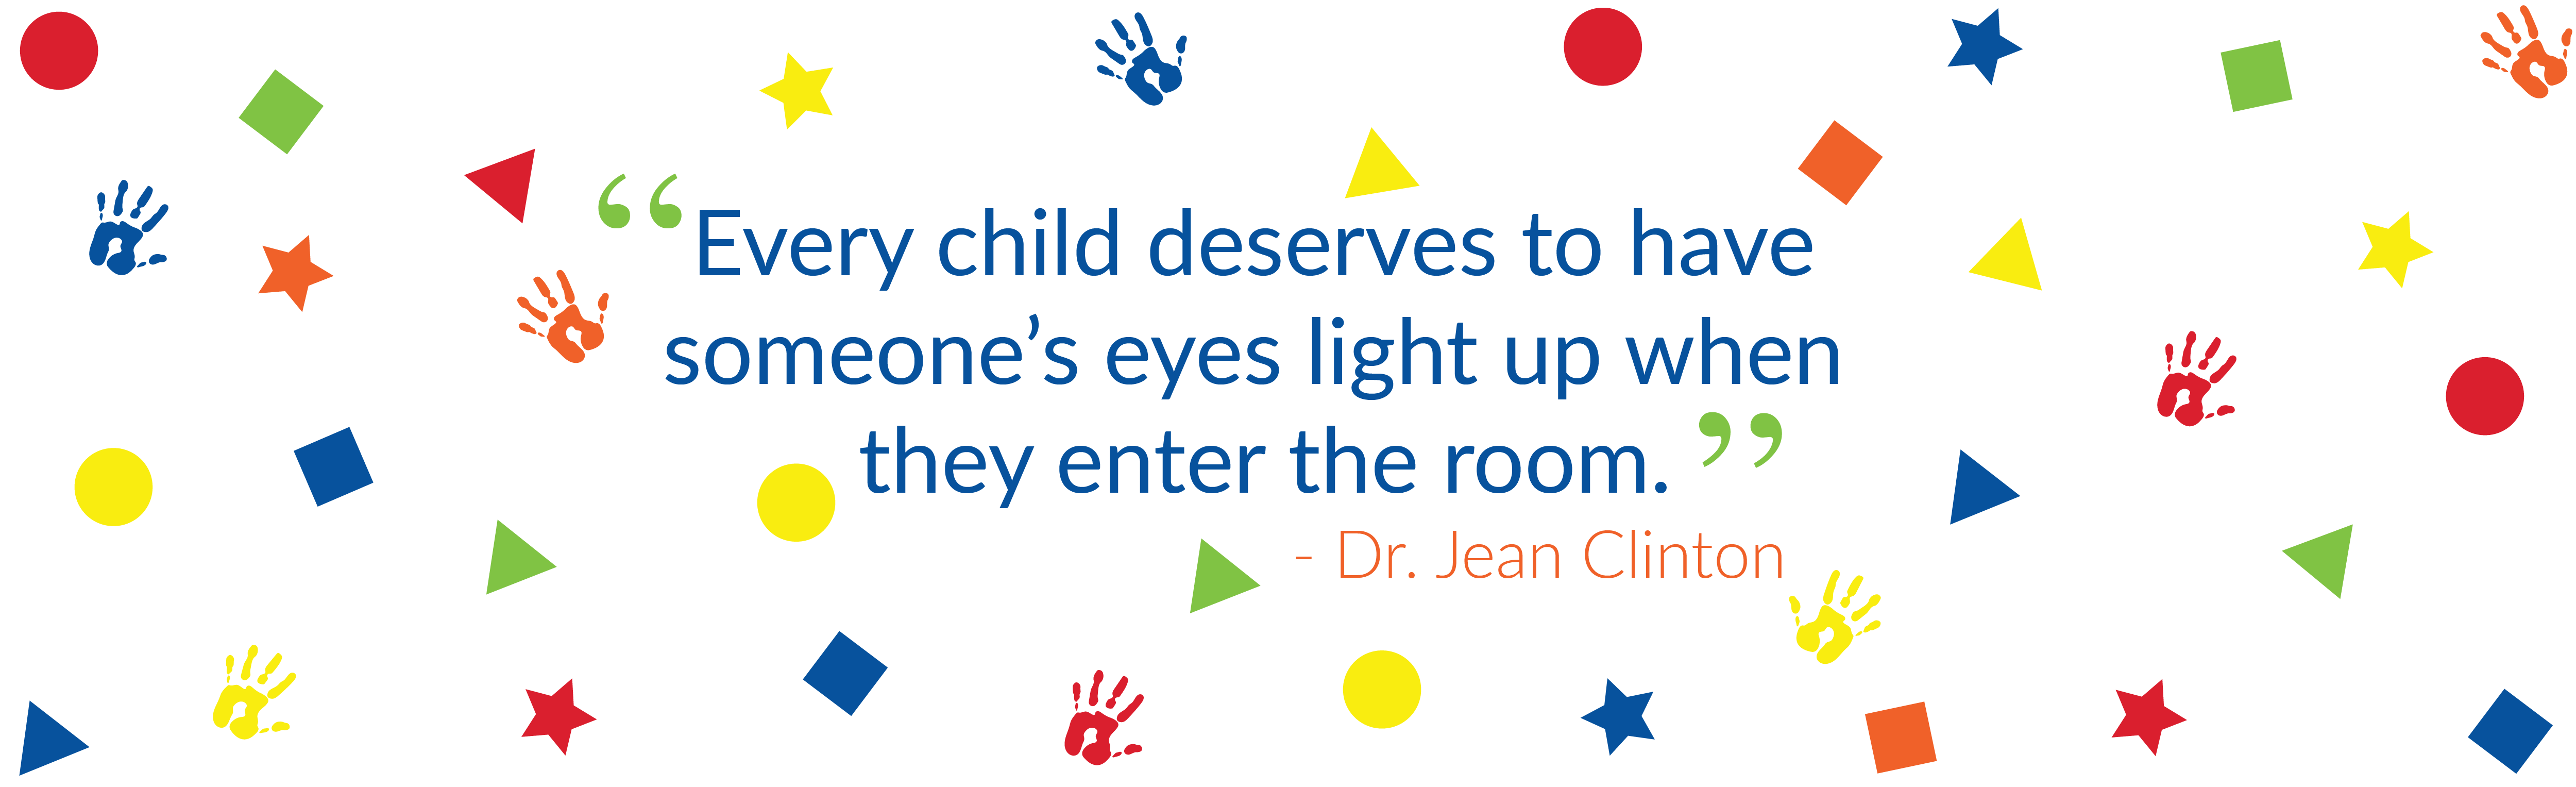 “Every child deserves to have someone’s eyes light up when they enter the room.”